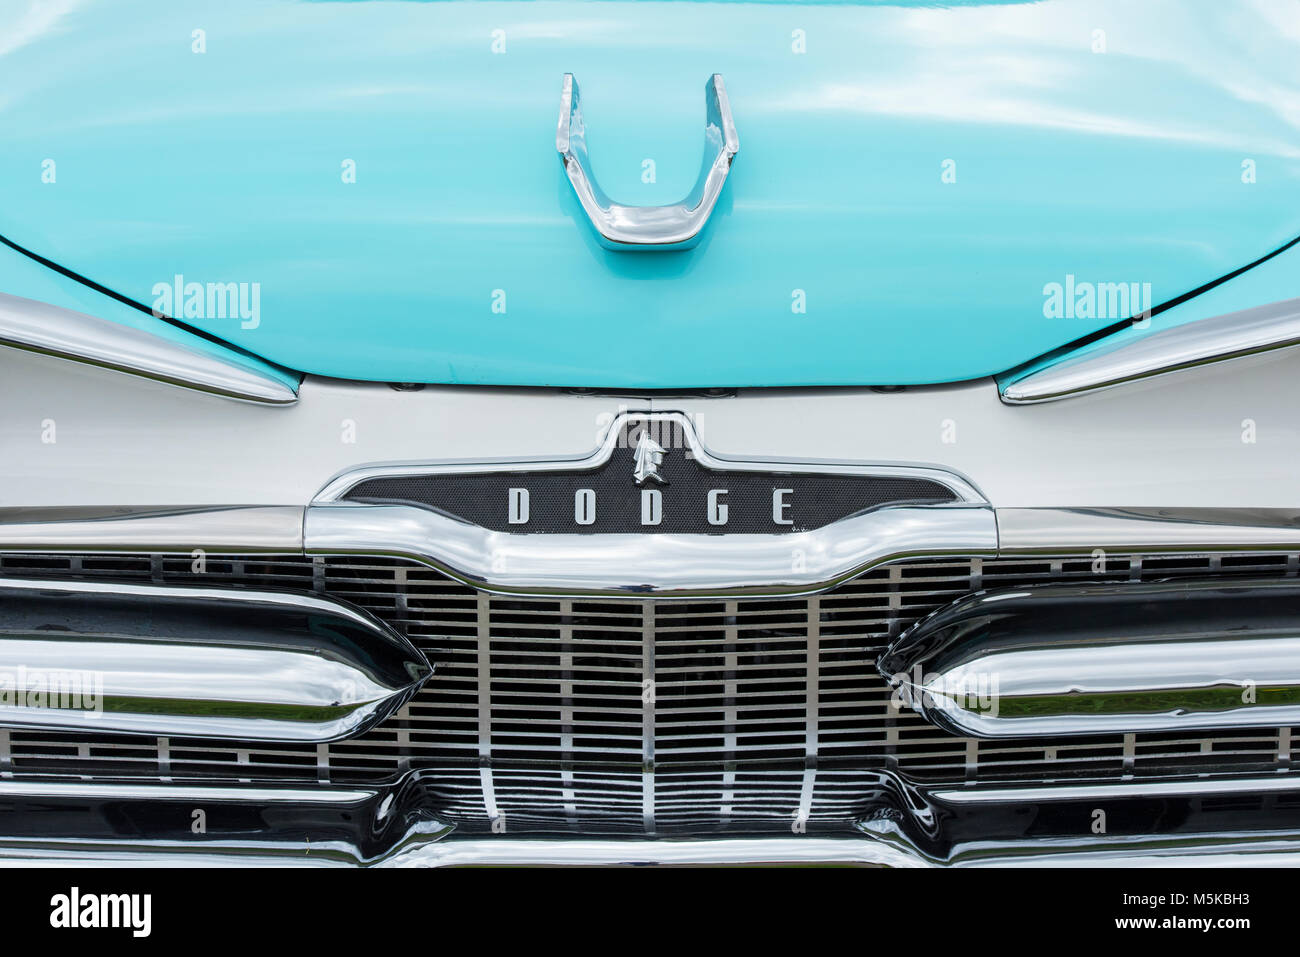 1959 Dodge Coronet front end. Classic American car Foto Stock